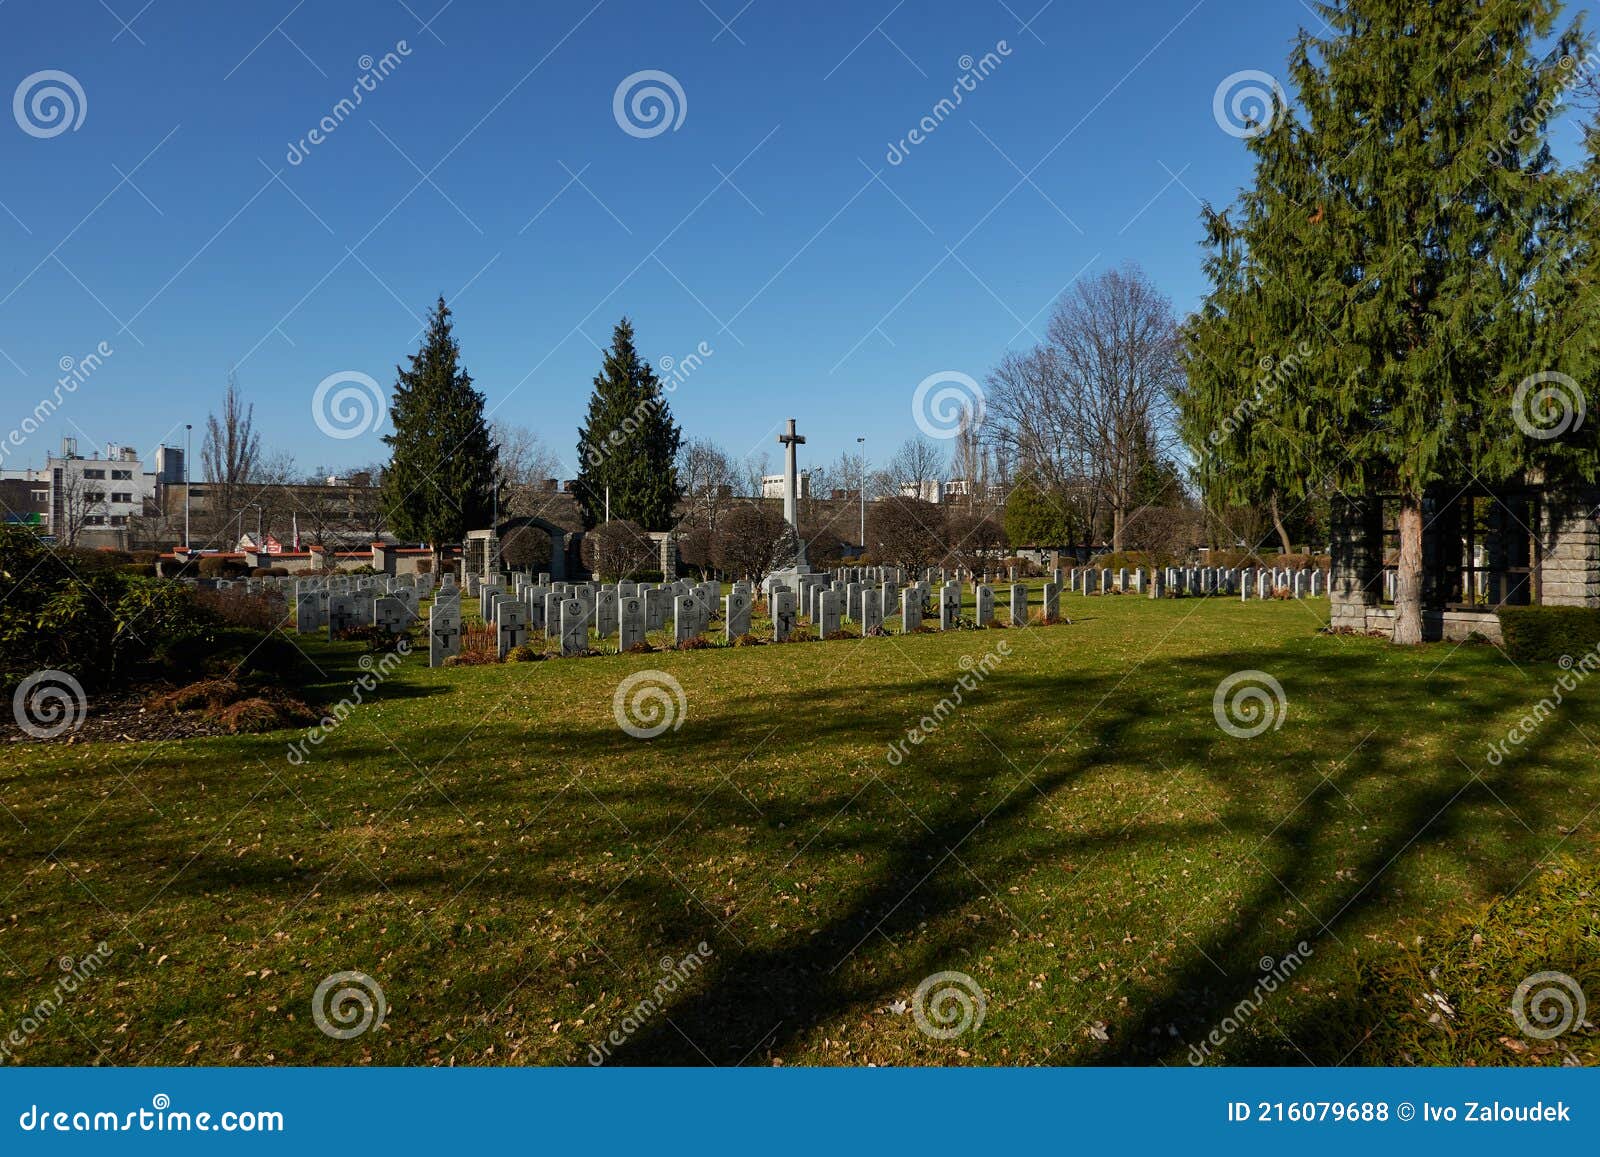 prague, czech republic - march 30, 2021 - prague war cemetery  1939 - 1945. there are even some commonwealth war graves here, most